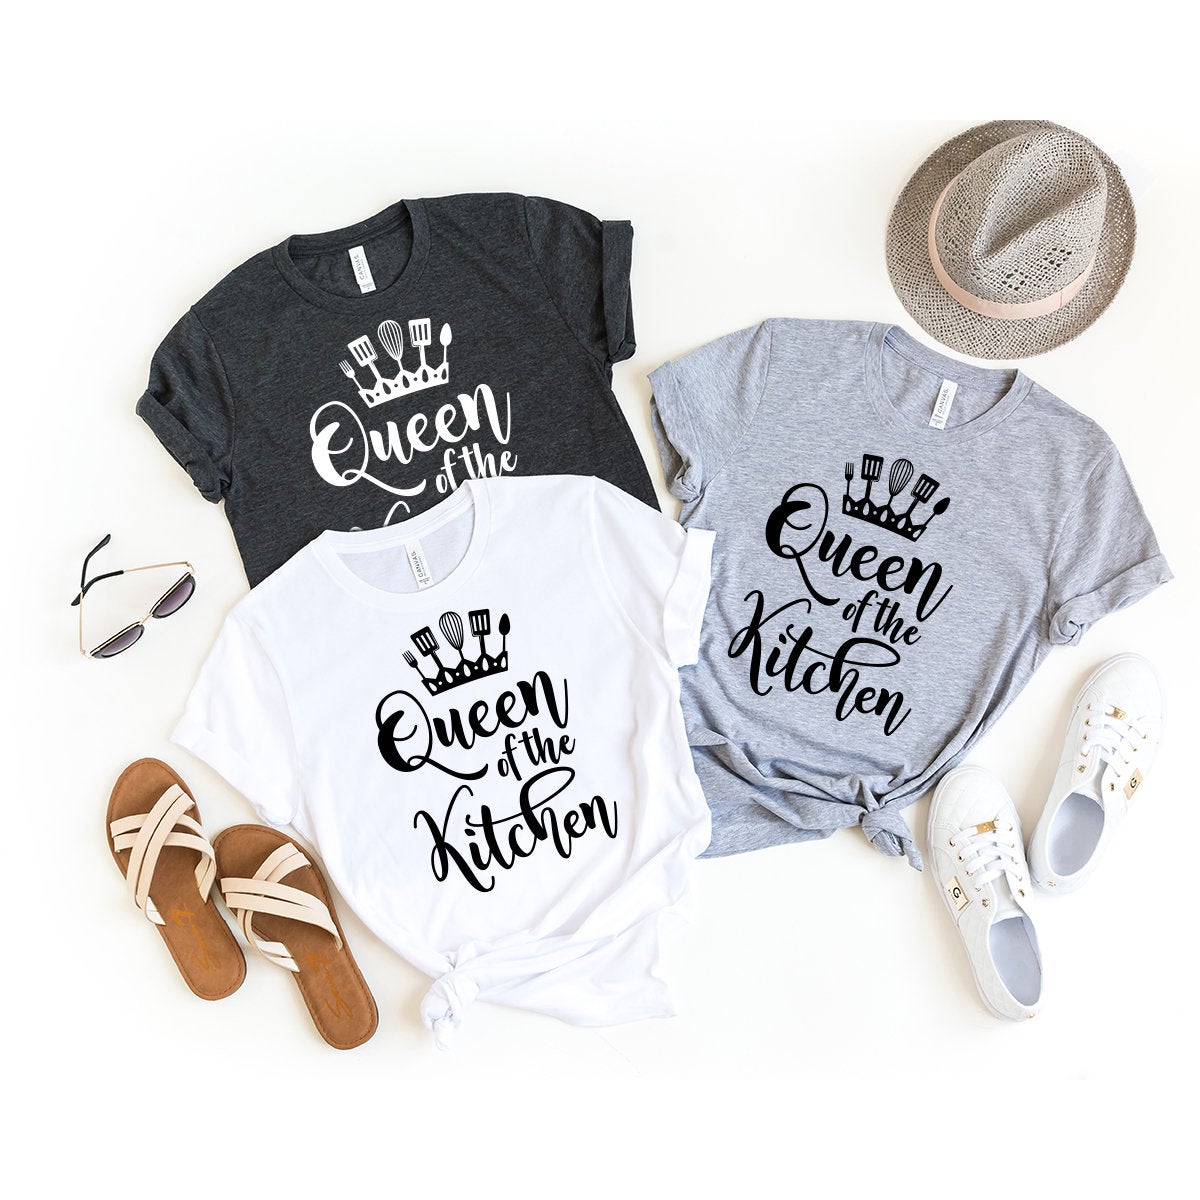 Mom Cooking Shirt, Queen Of The Kitchen Shirt, Baking Queen Shirt, Mom Life Shirt, Mom T Shirt, Kitchen Mom Shirt, Gift For Mom, Mom Tee - Fastdeliverytees.com